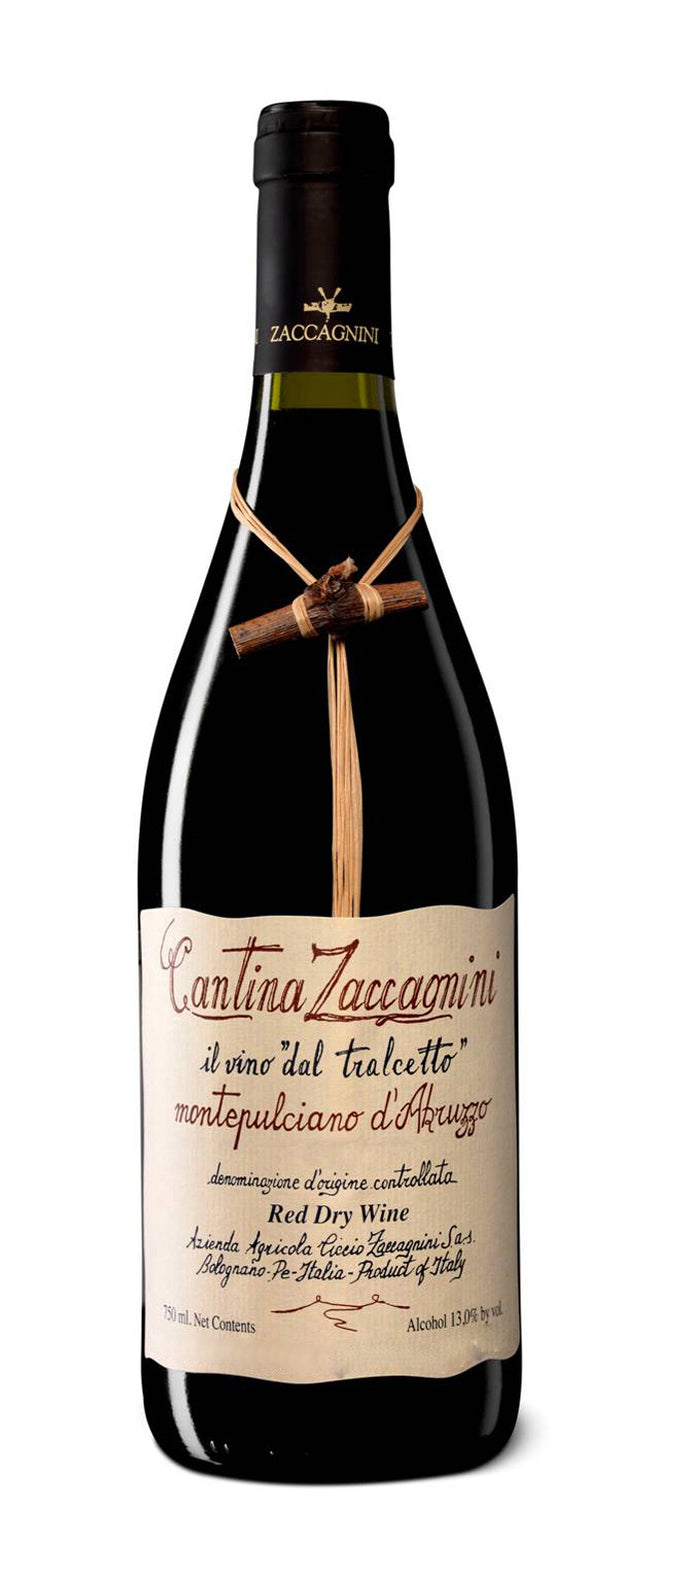 Cantina Zaccagnini Montepulciano Wine, 750 mL Type: Red Categories: 750mL, Italy, Montepulciano, quantity high enough for online, region_Italy, size_750mL, subtype_Montepulciano. Buy today at Wine and Liquor Mart Poughkeepsie